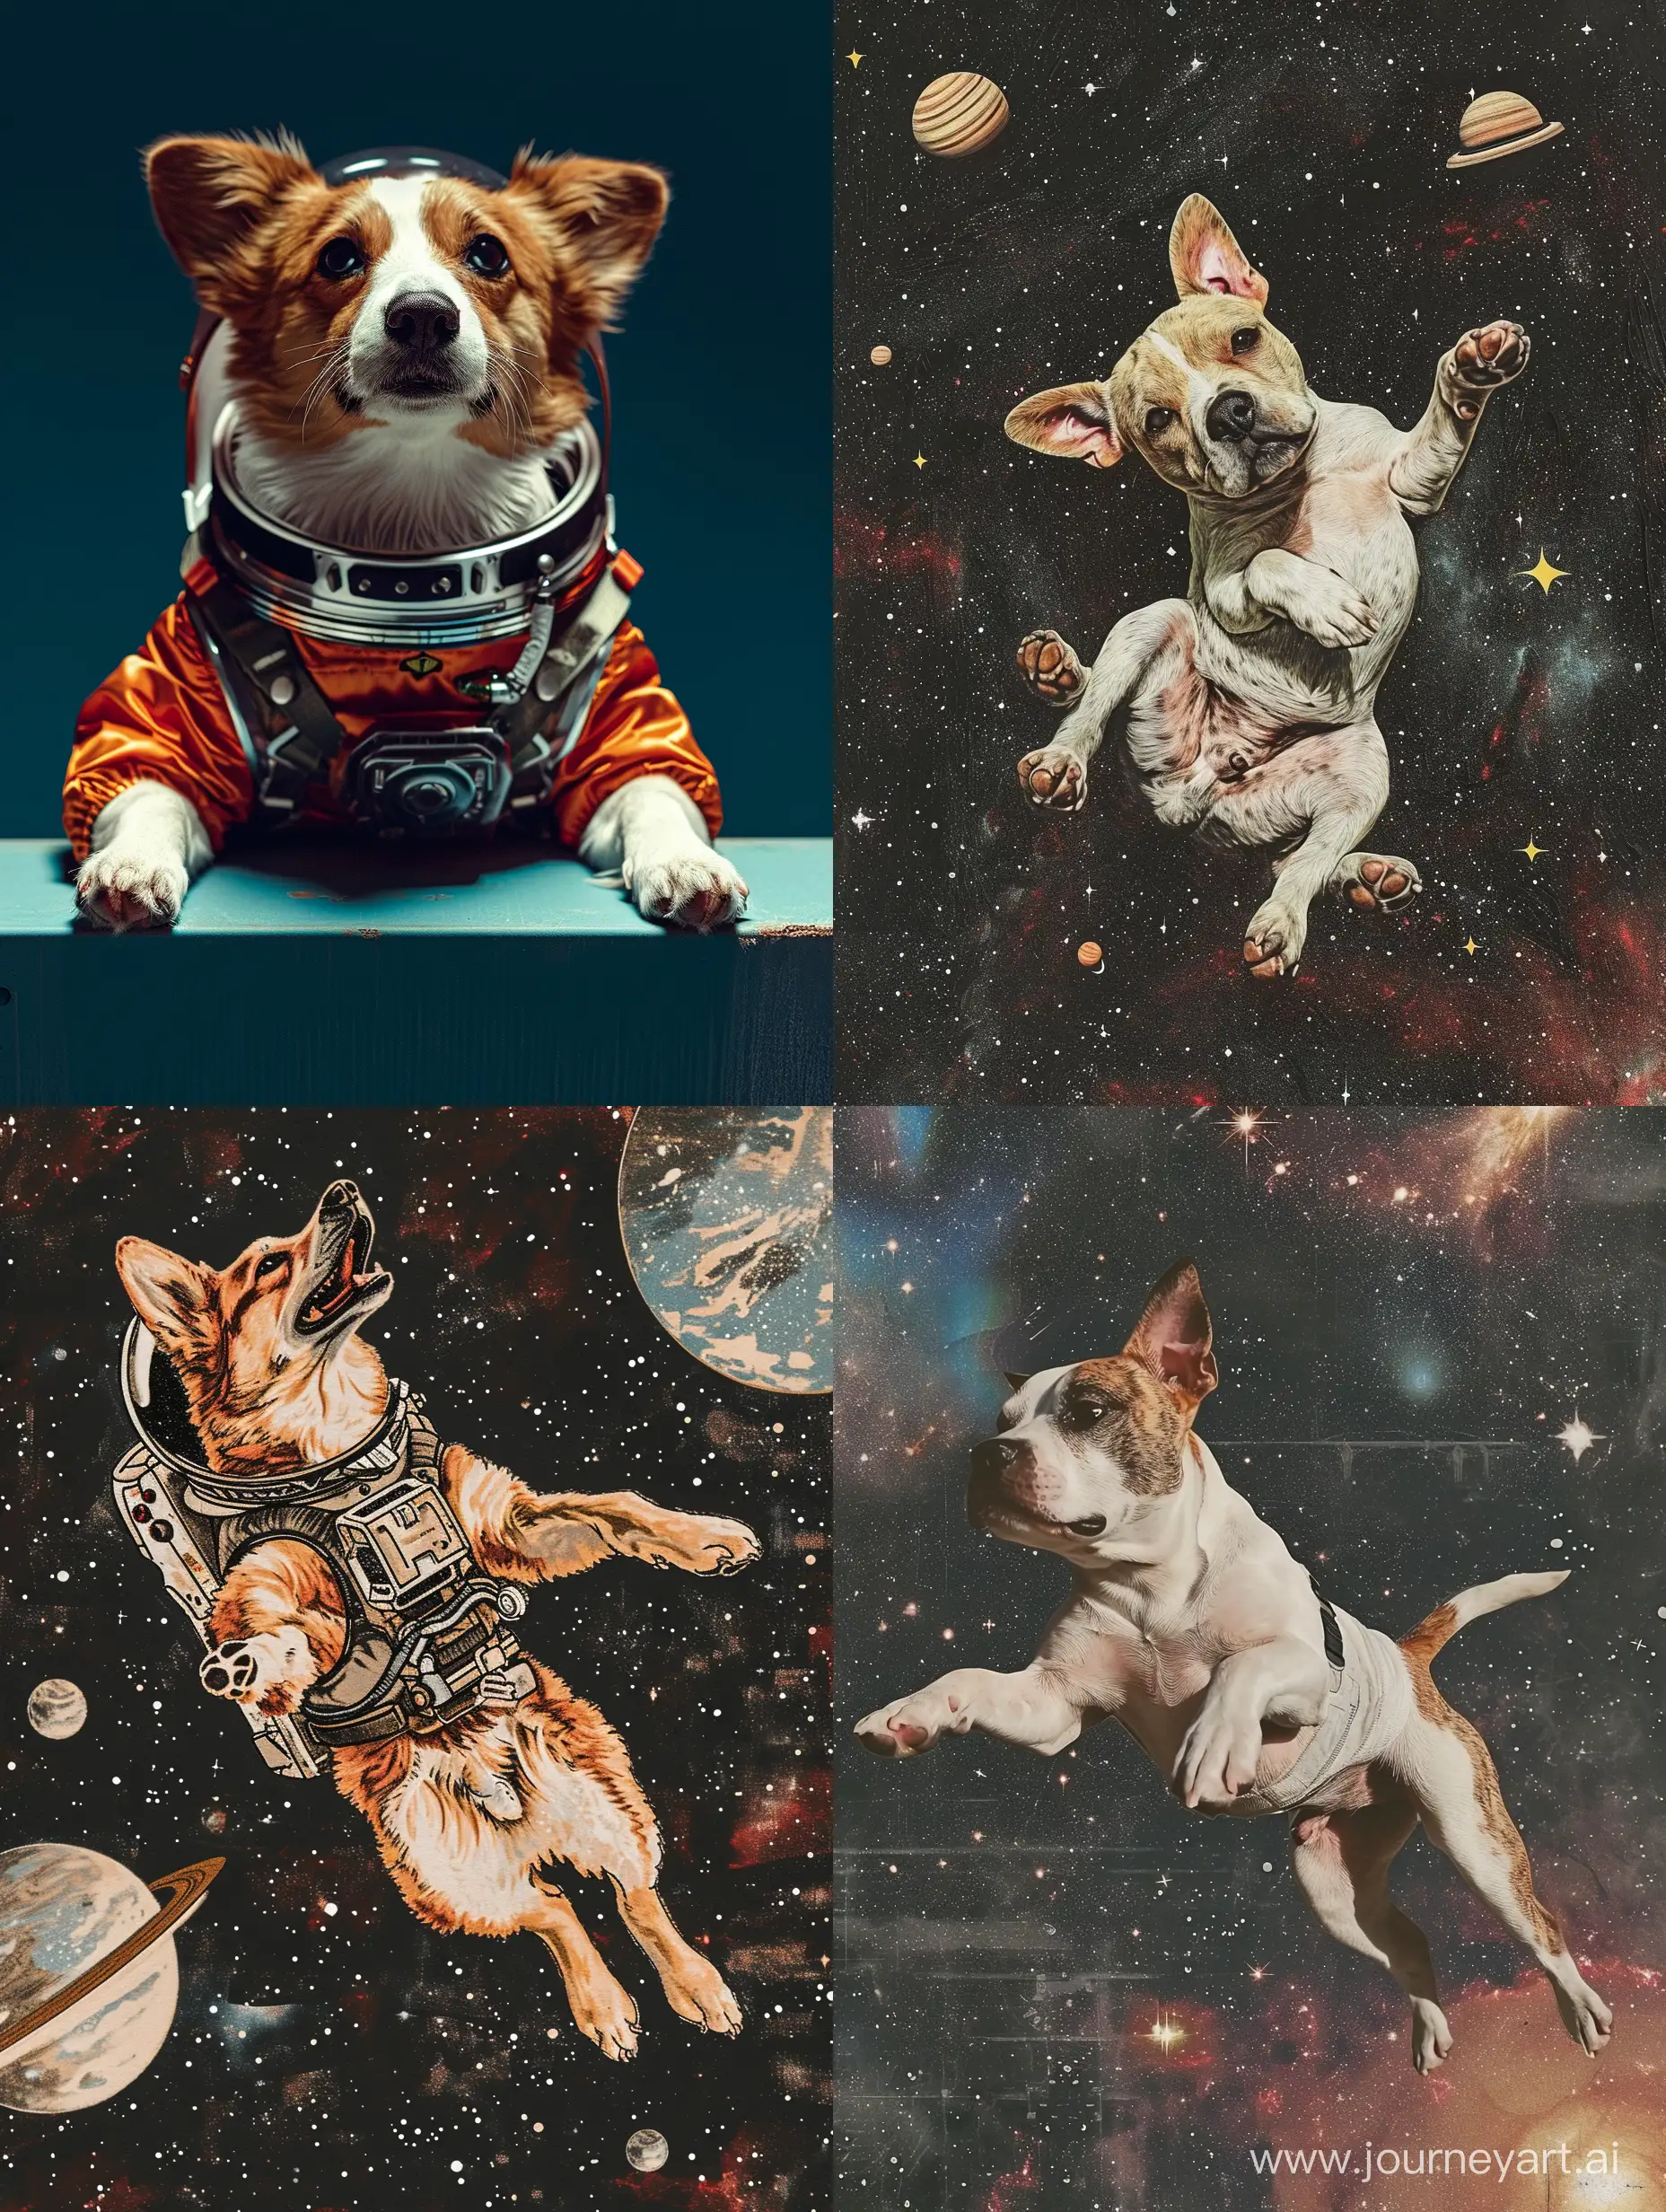 Dog in space
